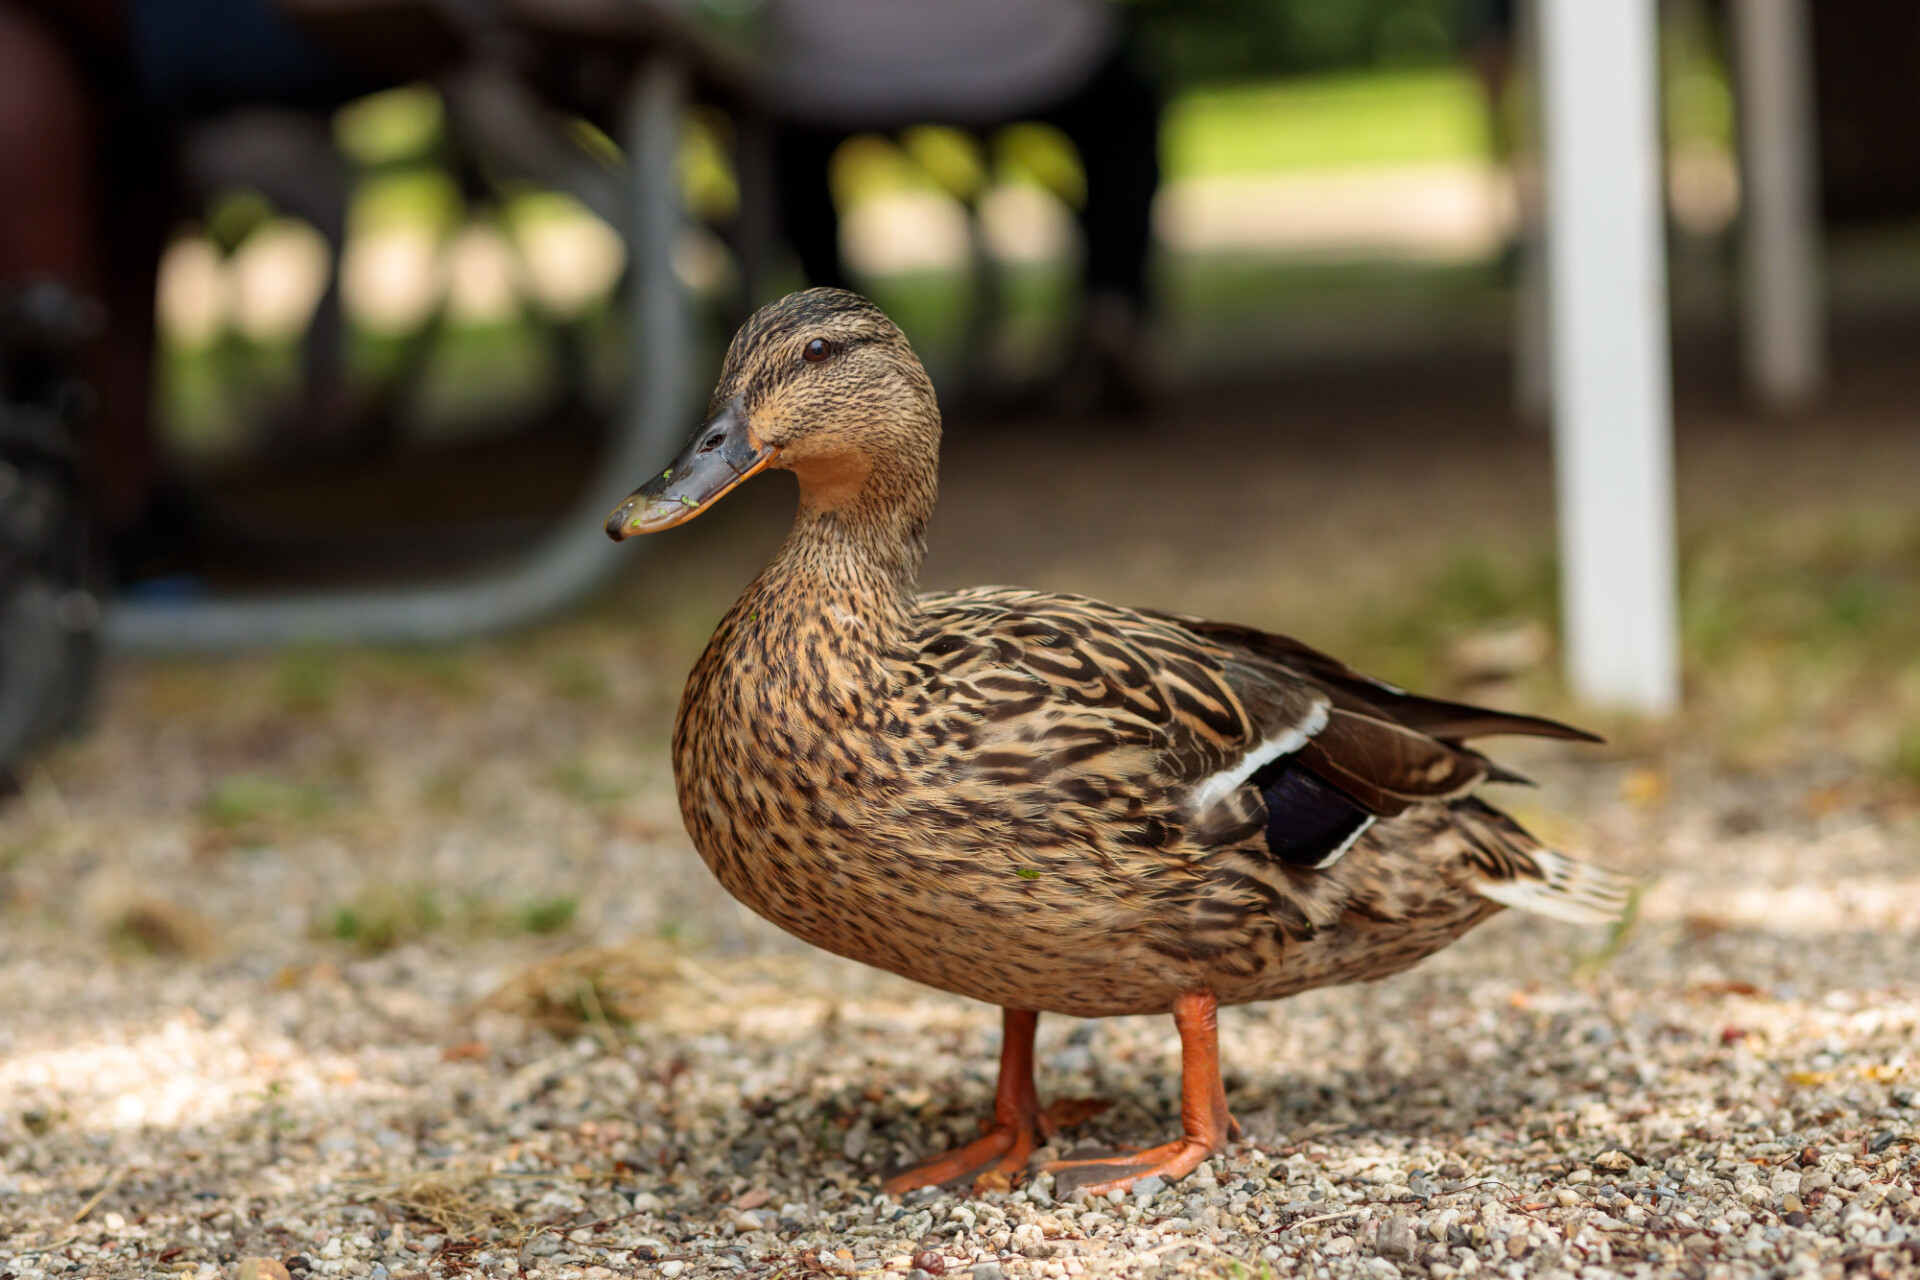 Cute duck in the park